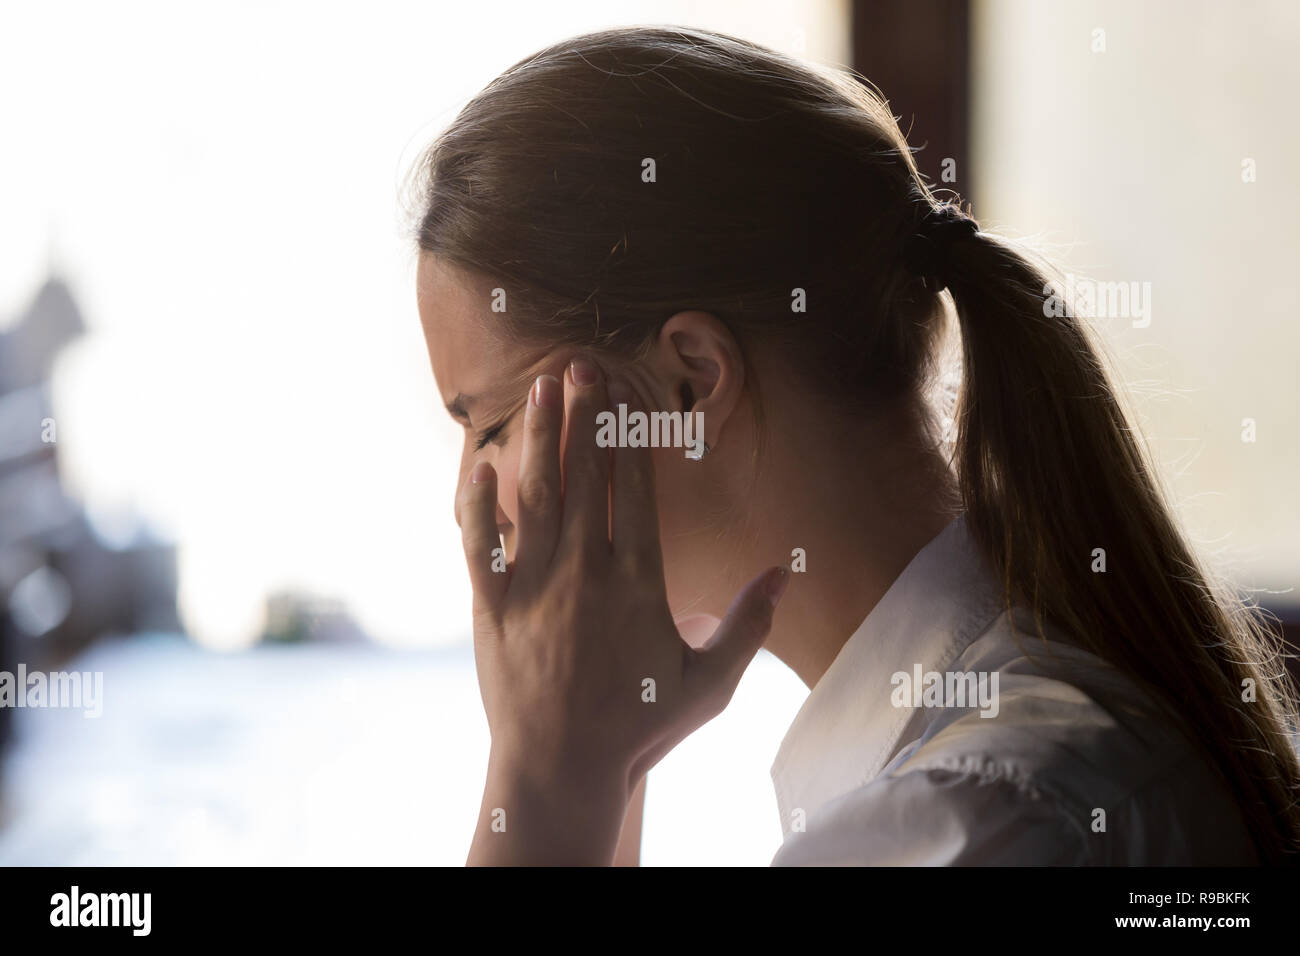 Strong headache concept, young exhausted woman feeling pain touc Stock Photo